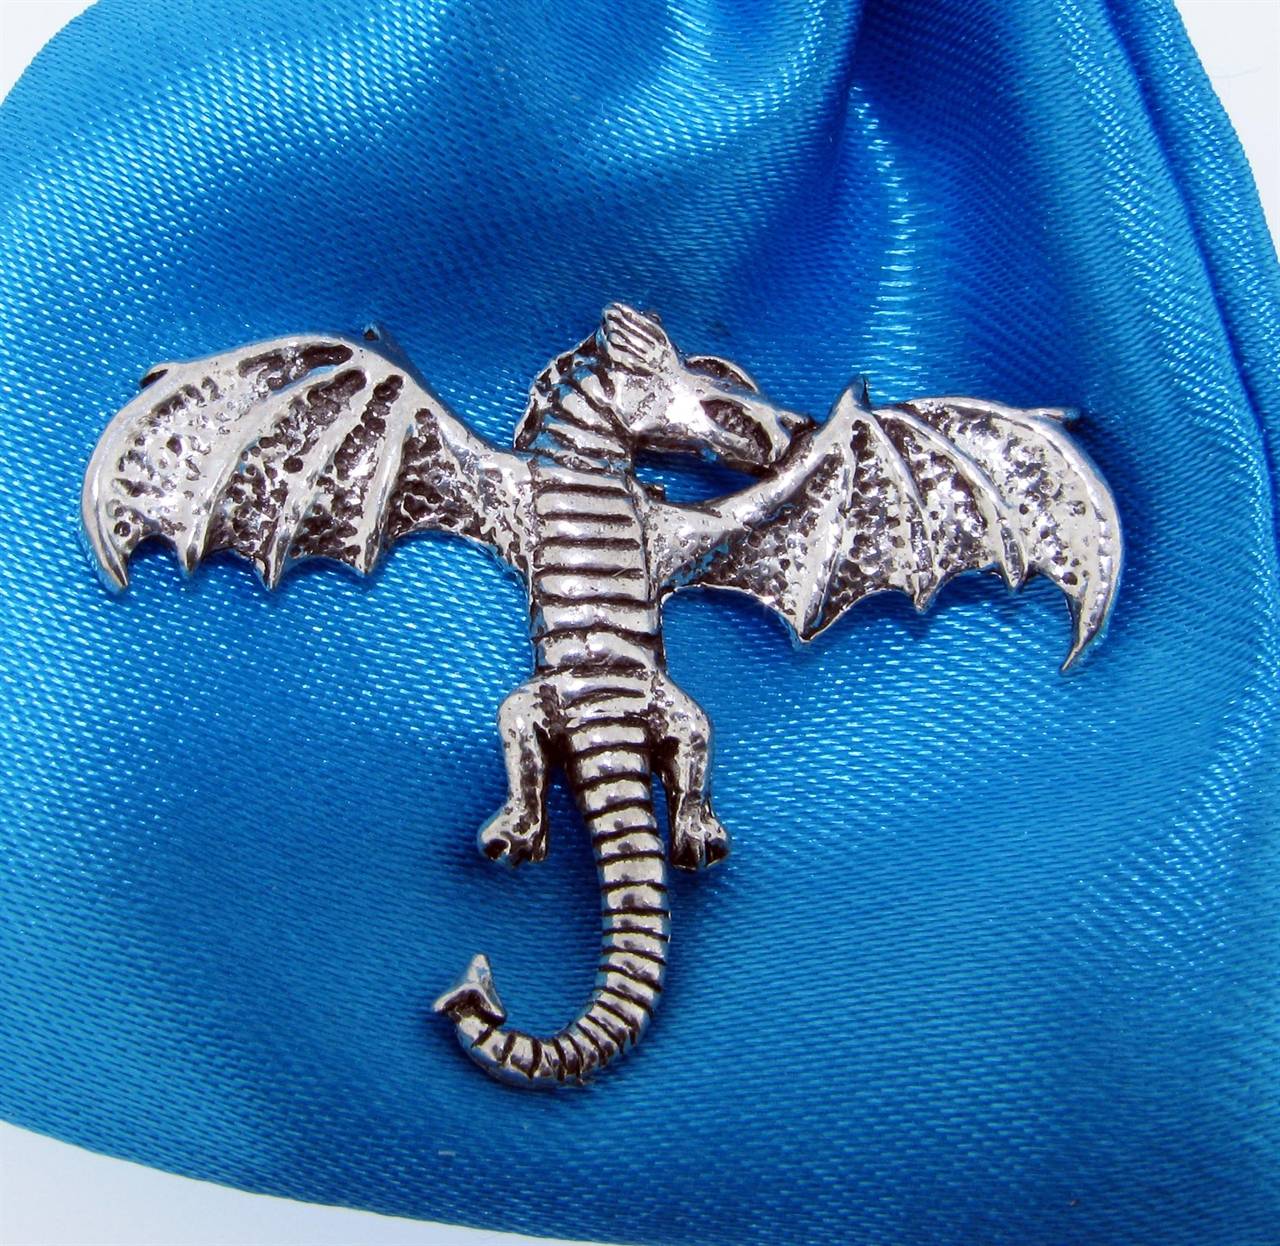 Dragon Pin Badge - high quality pewter gifts from Pageant Pewter